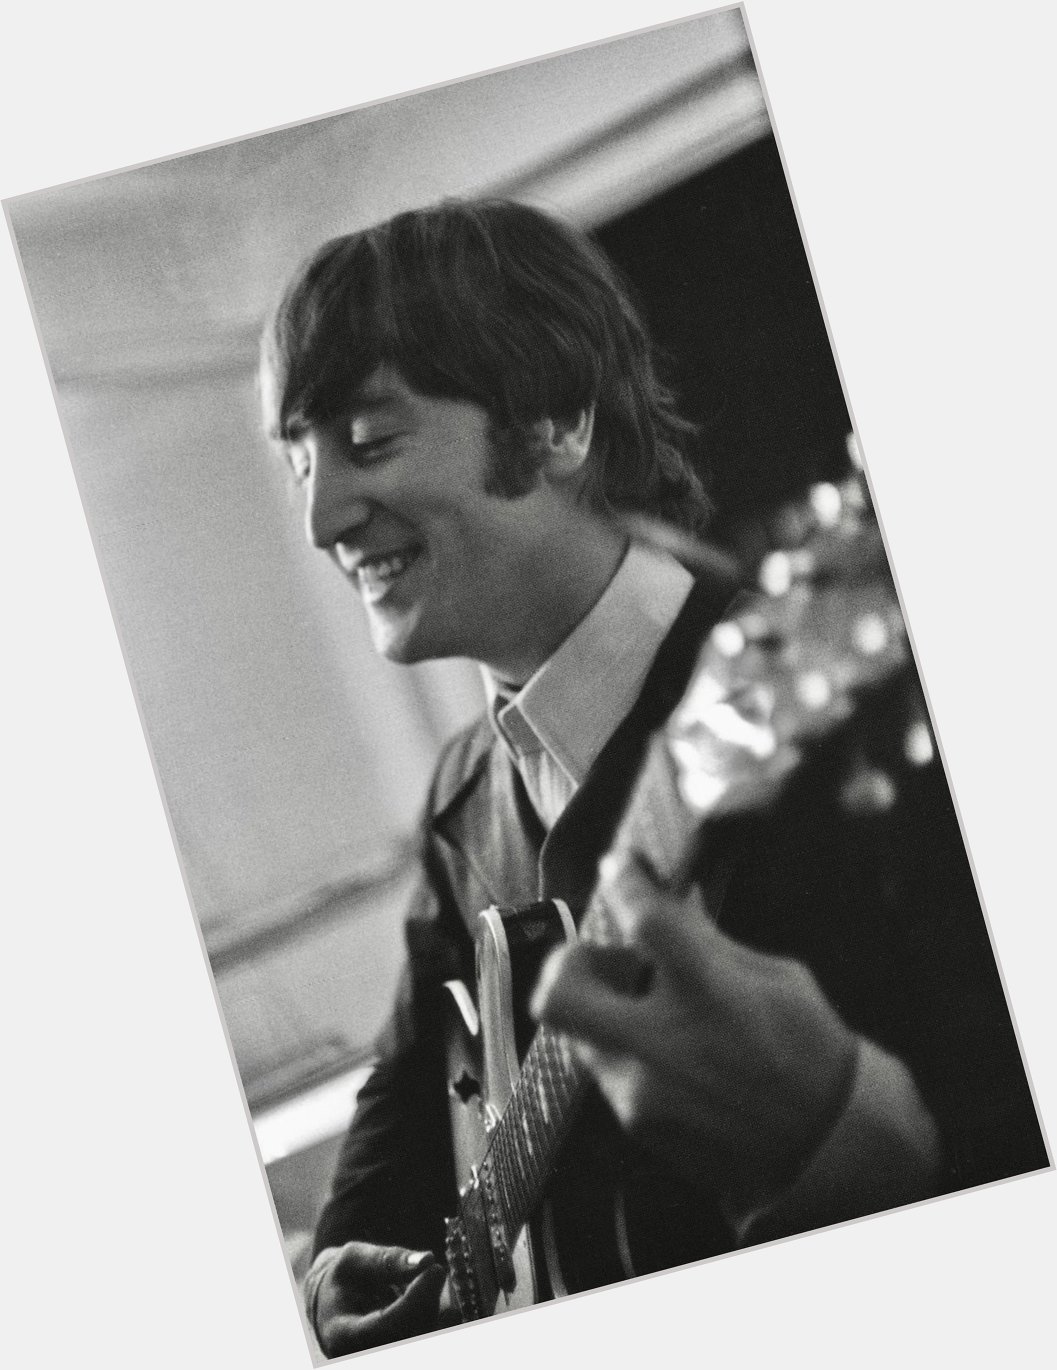 Happy Birthday to a certain John Lennon. Where would be without him? 